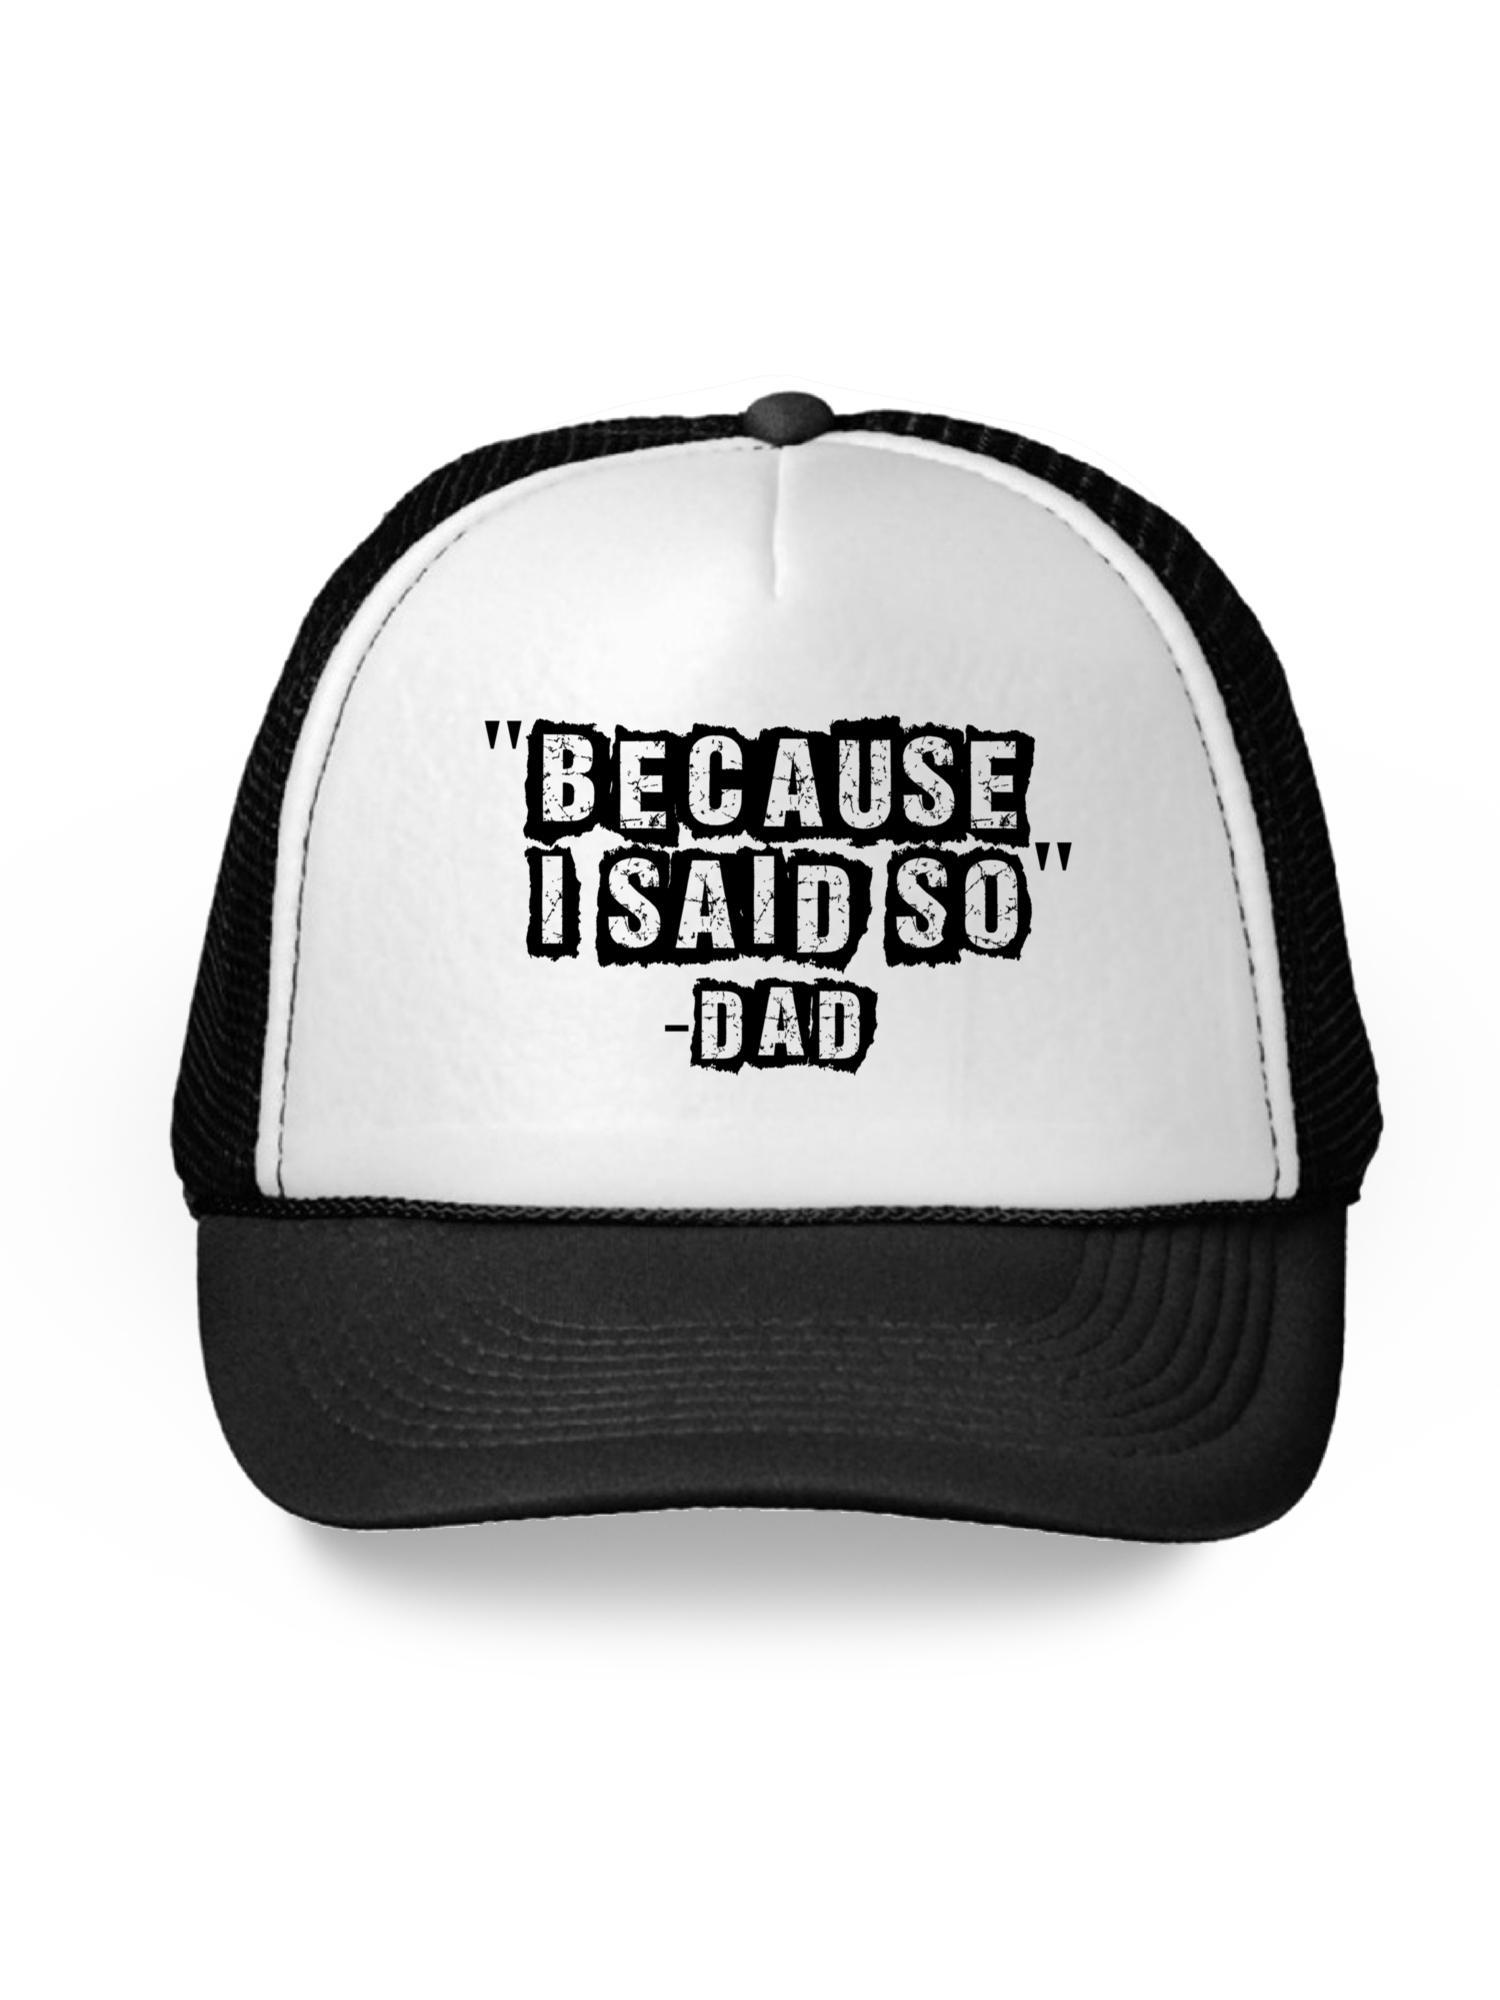 Awkward Styles Gifts for Dad Because I Said So Dad Hat Boss Dad Trucker Hat Legendary Dad Hat Funny Gifts for Father's Day Hat Accessories for Dad Father Trucker Hat Father's Day 2018 Father Son - image 1 of 6